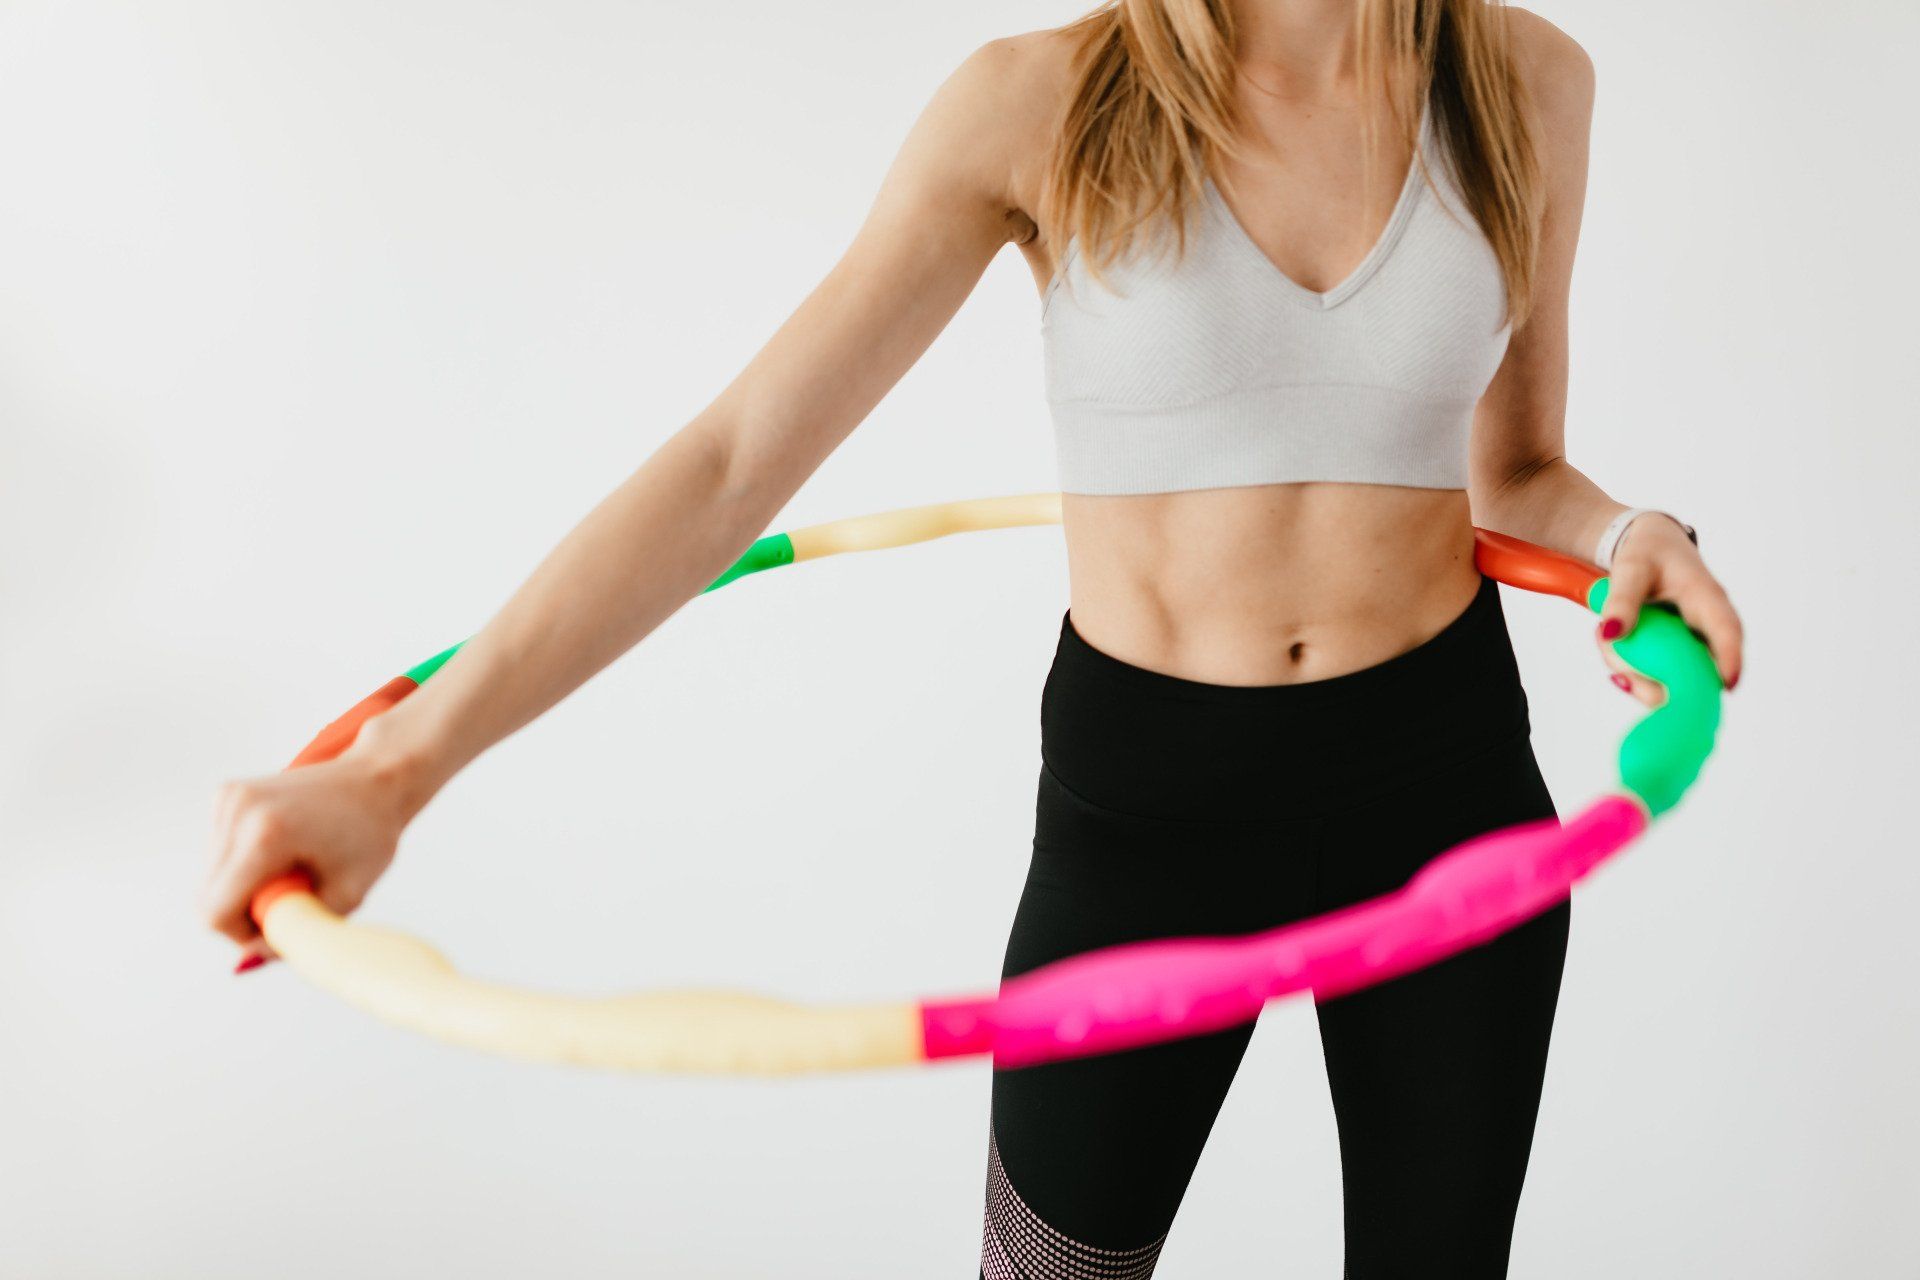 A woman is holding a colorful hula hoop in her hands.